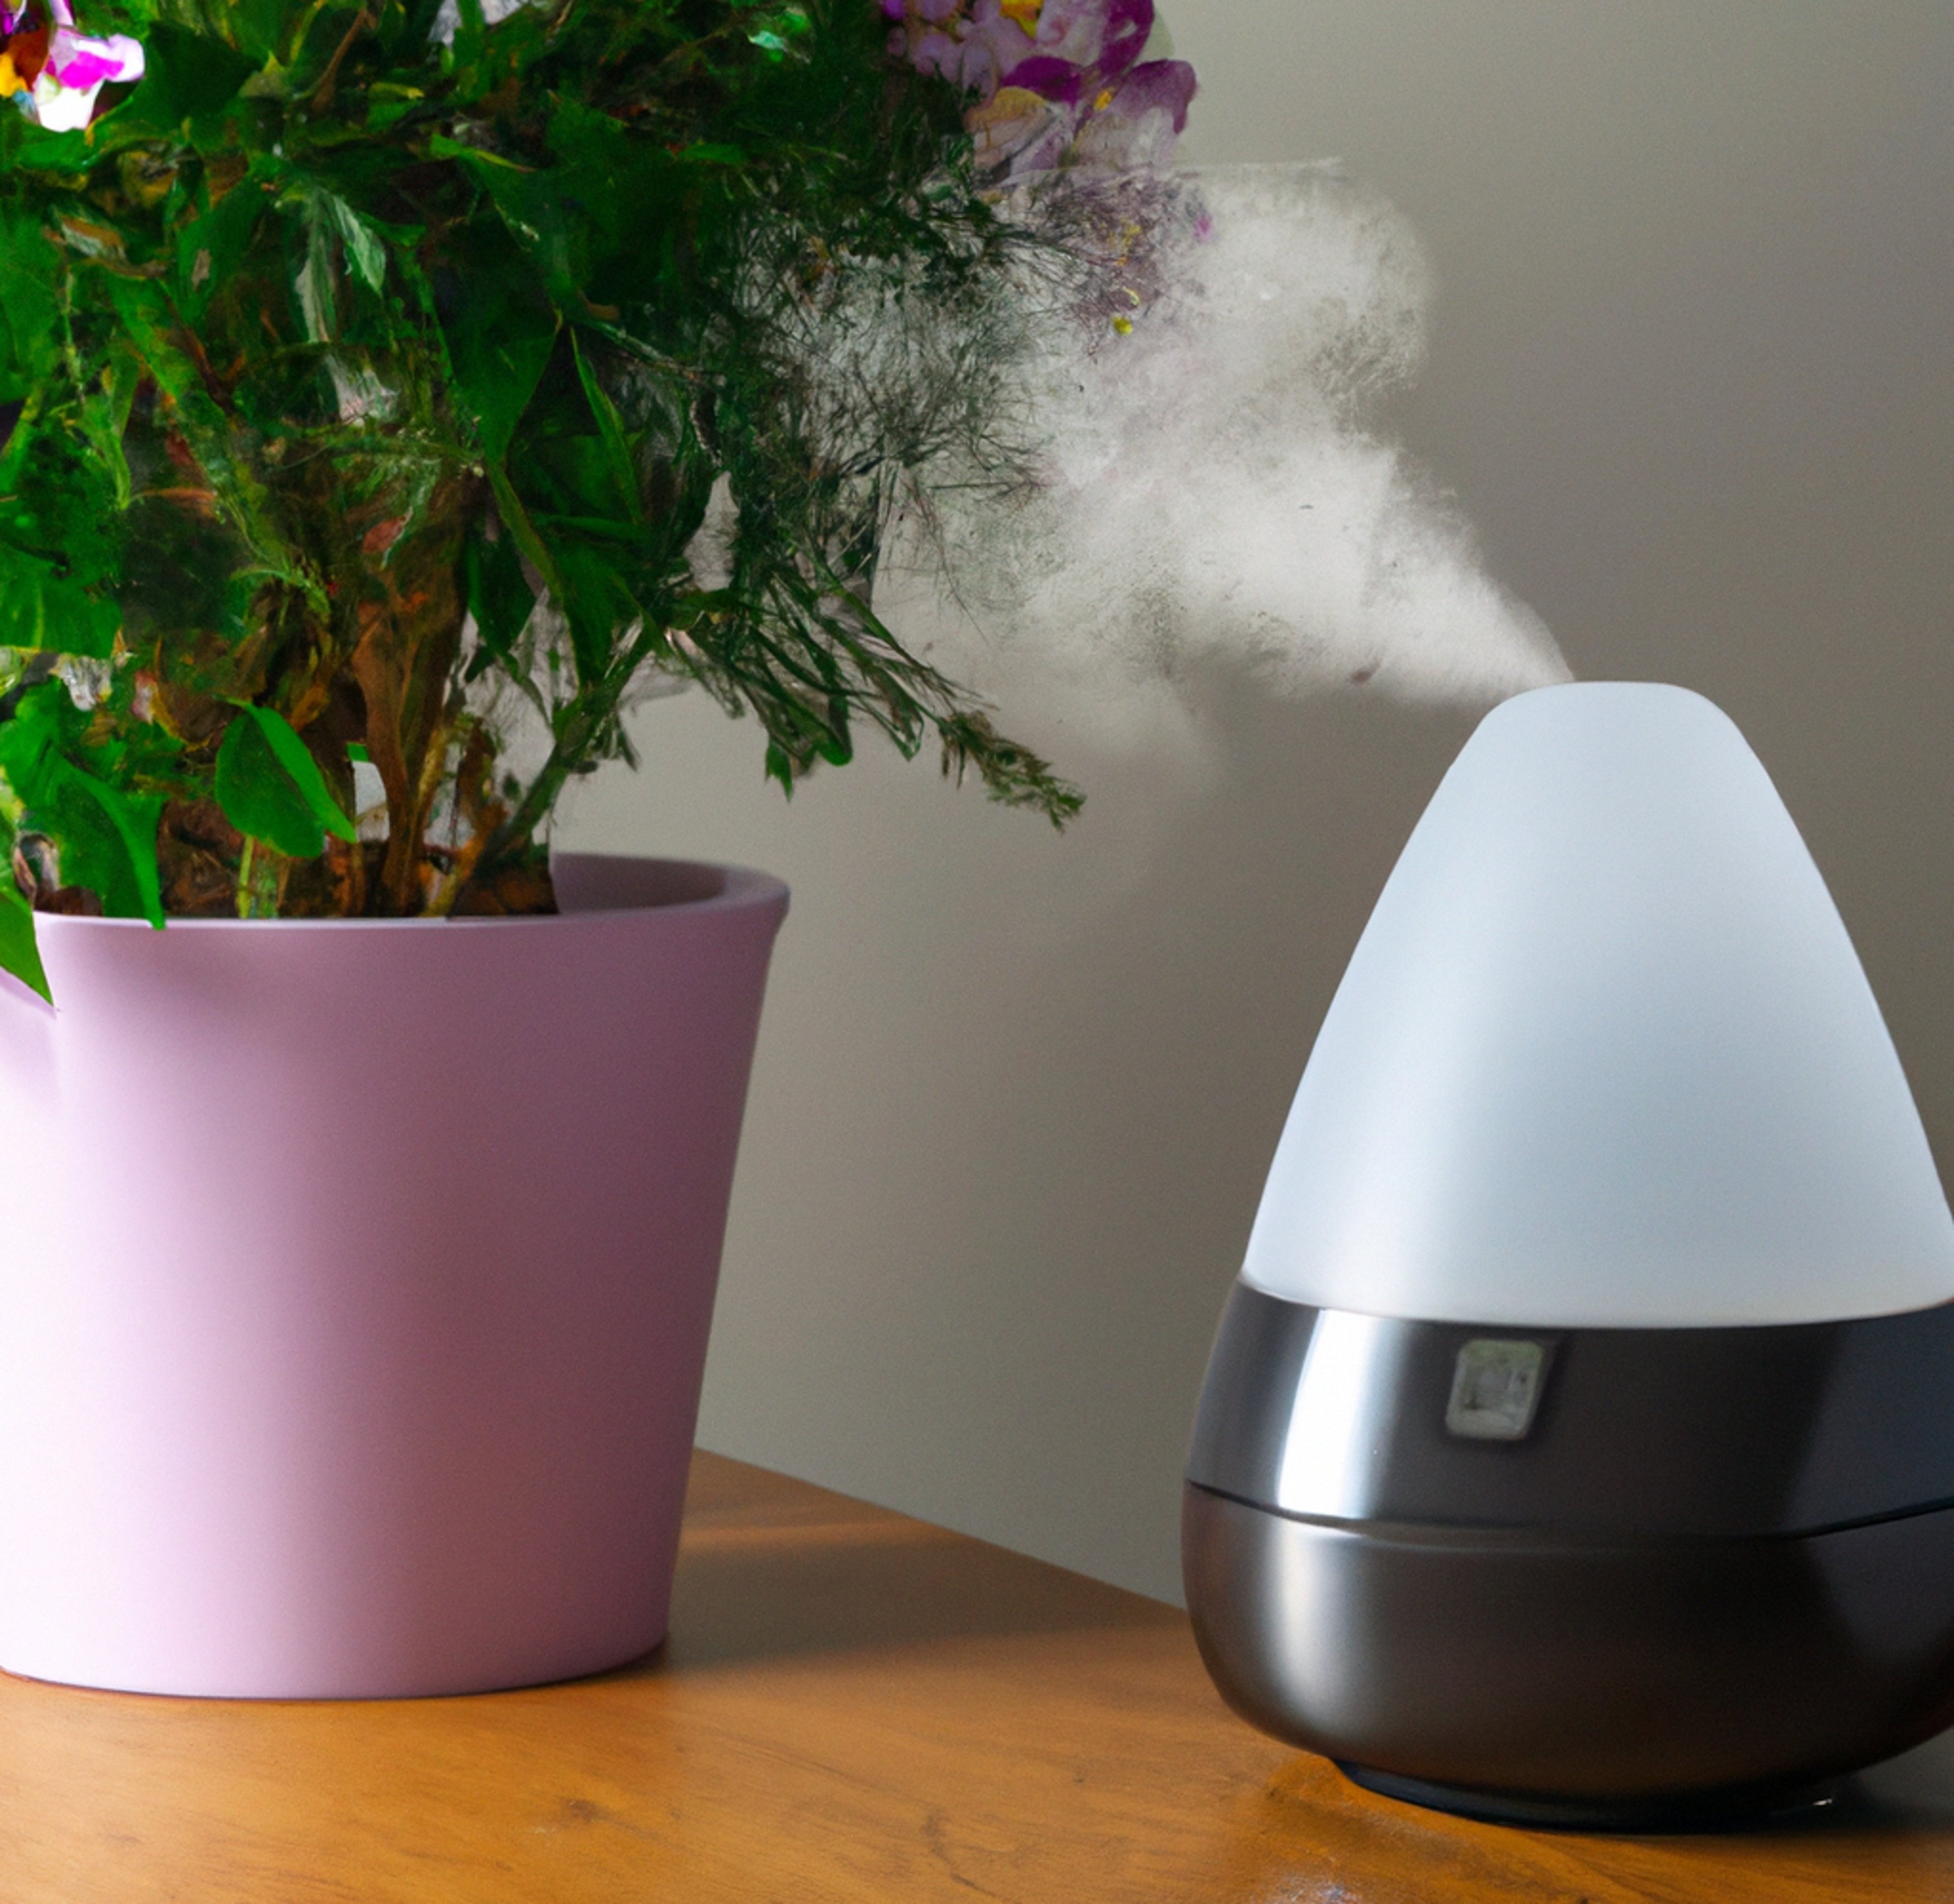 Can a Humidifier Make You Sick? Understanding the Effects of Humidity on Health